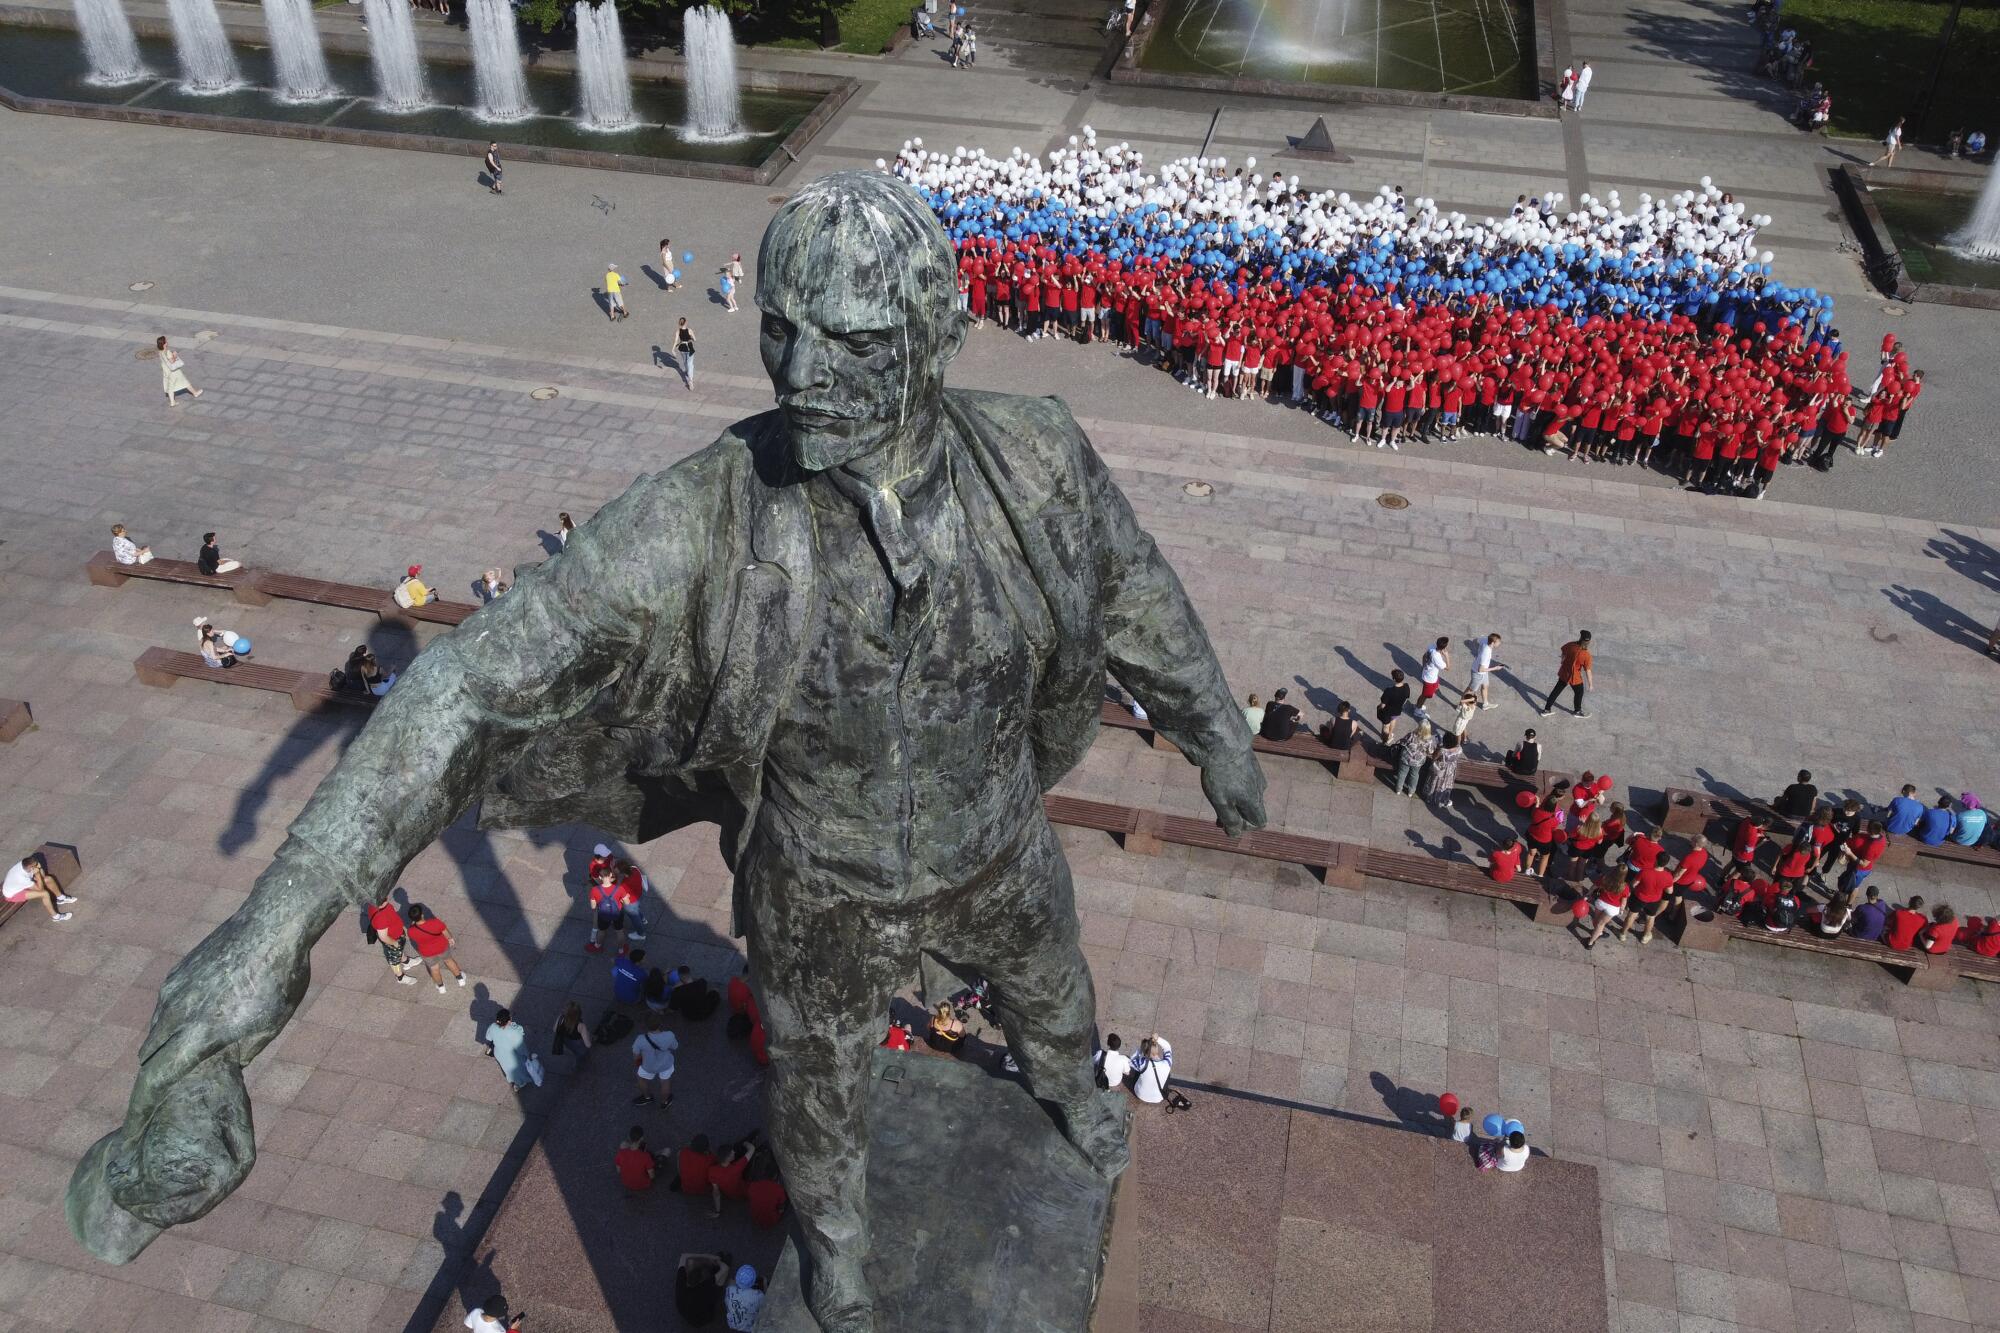 A giant statue towers over people wearing white, blue or red clothes.